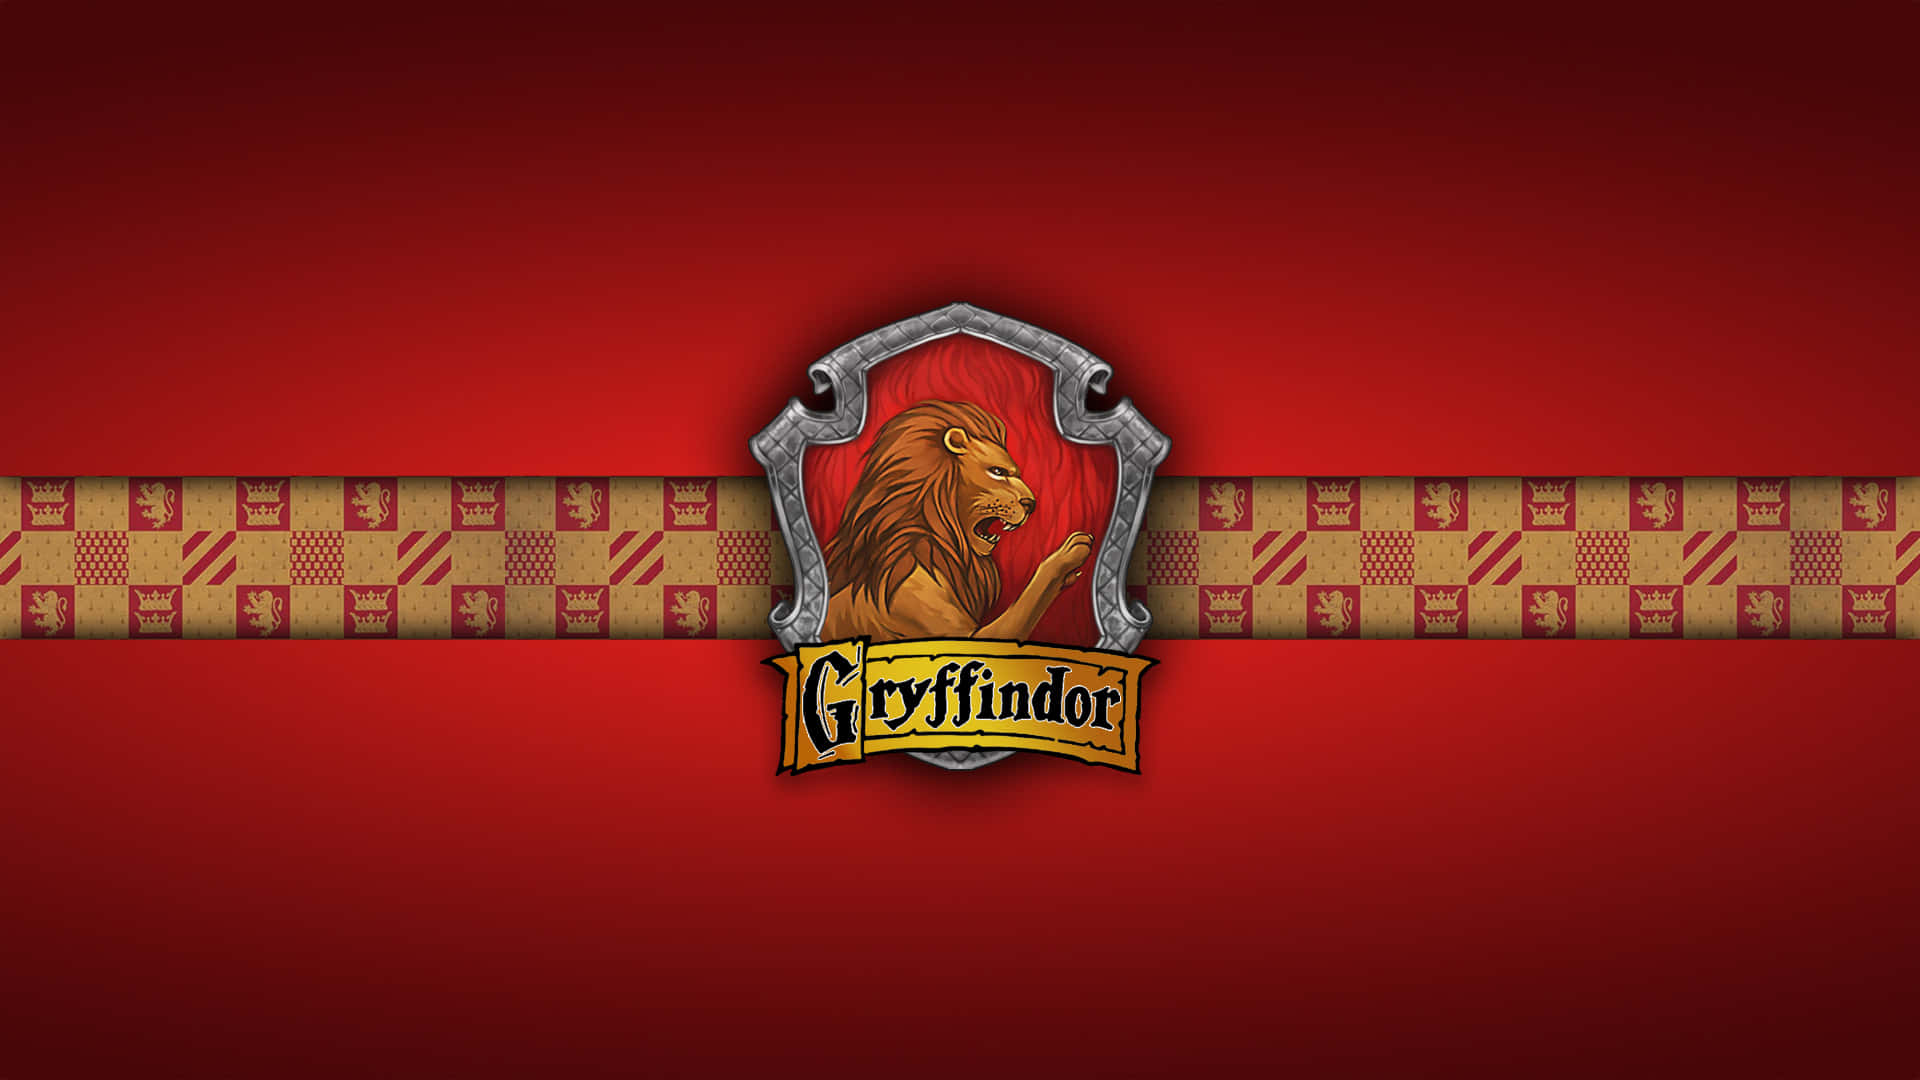 The Immortal Wall of House Gryffindor Wallpaper